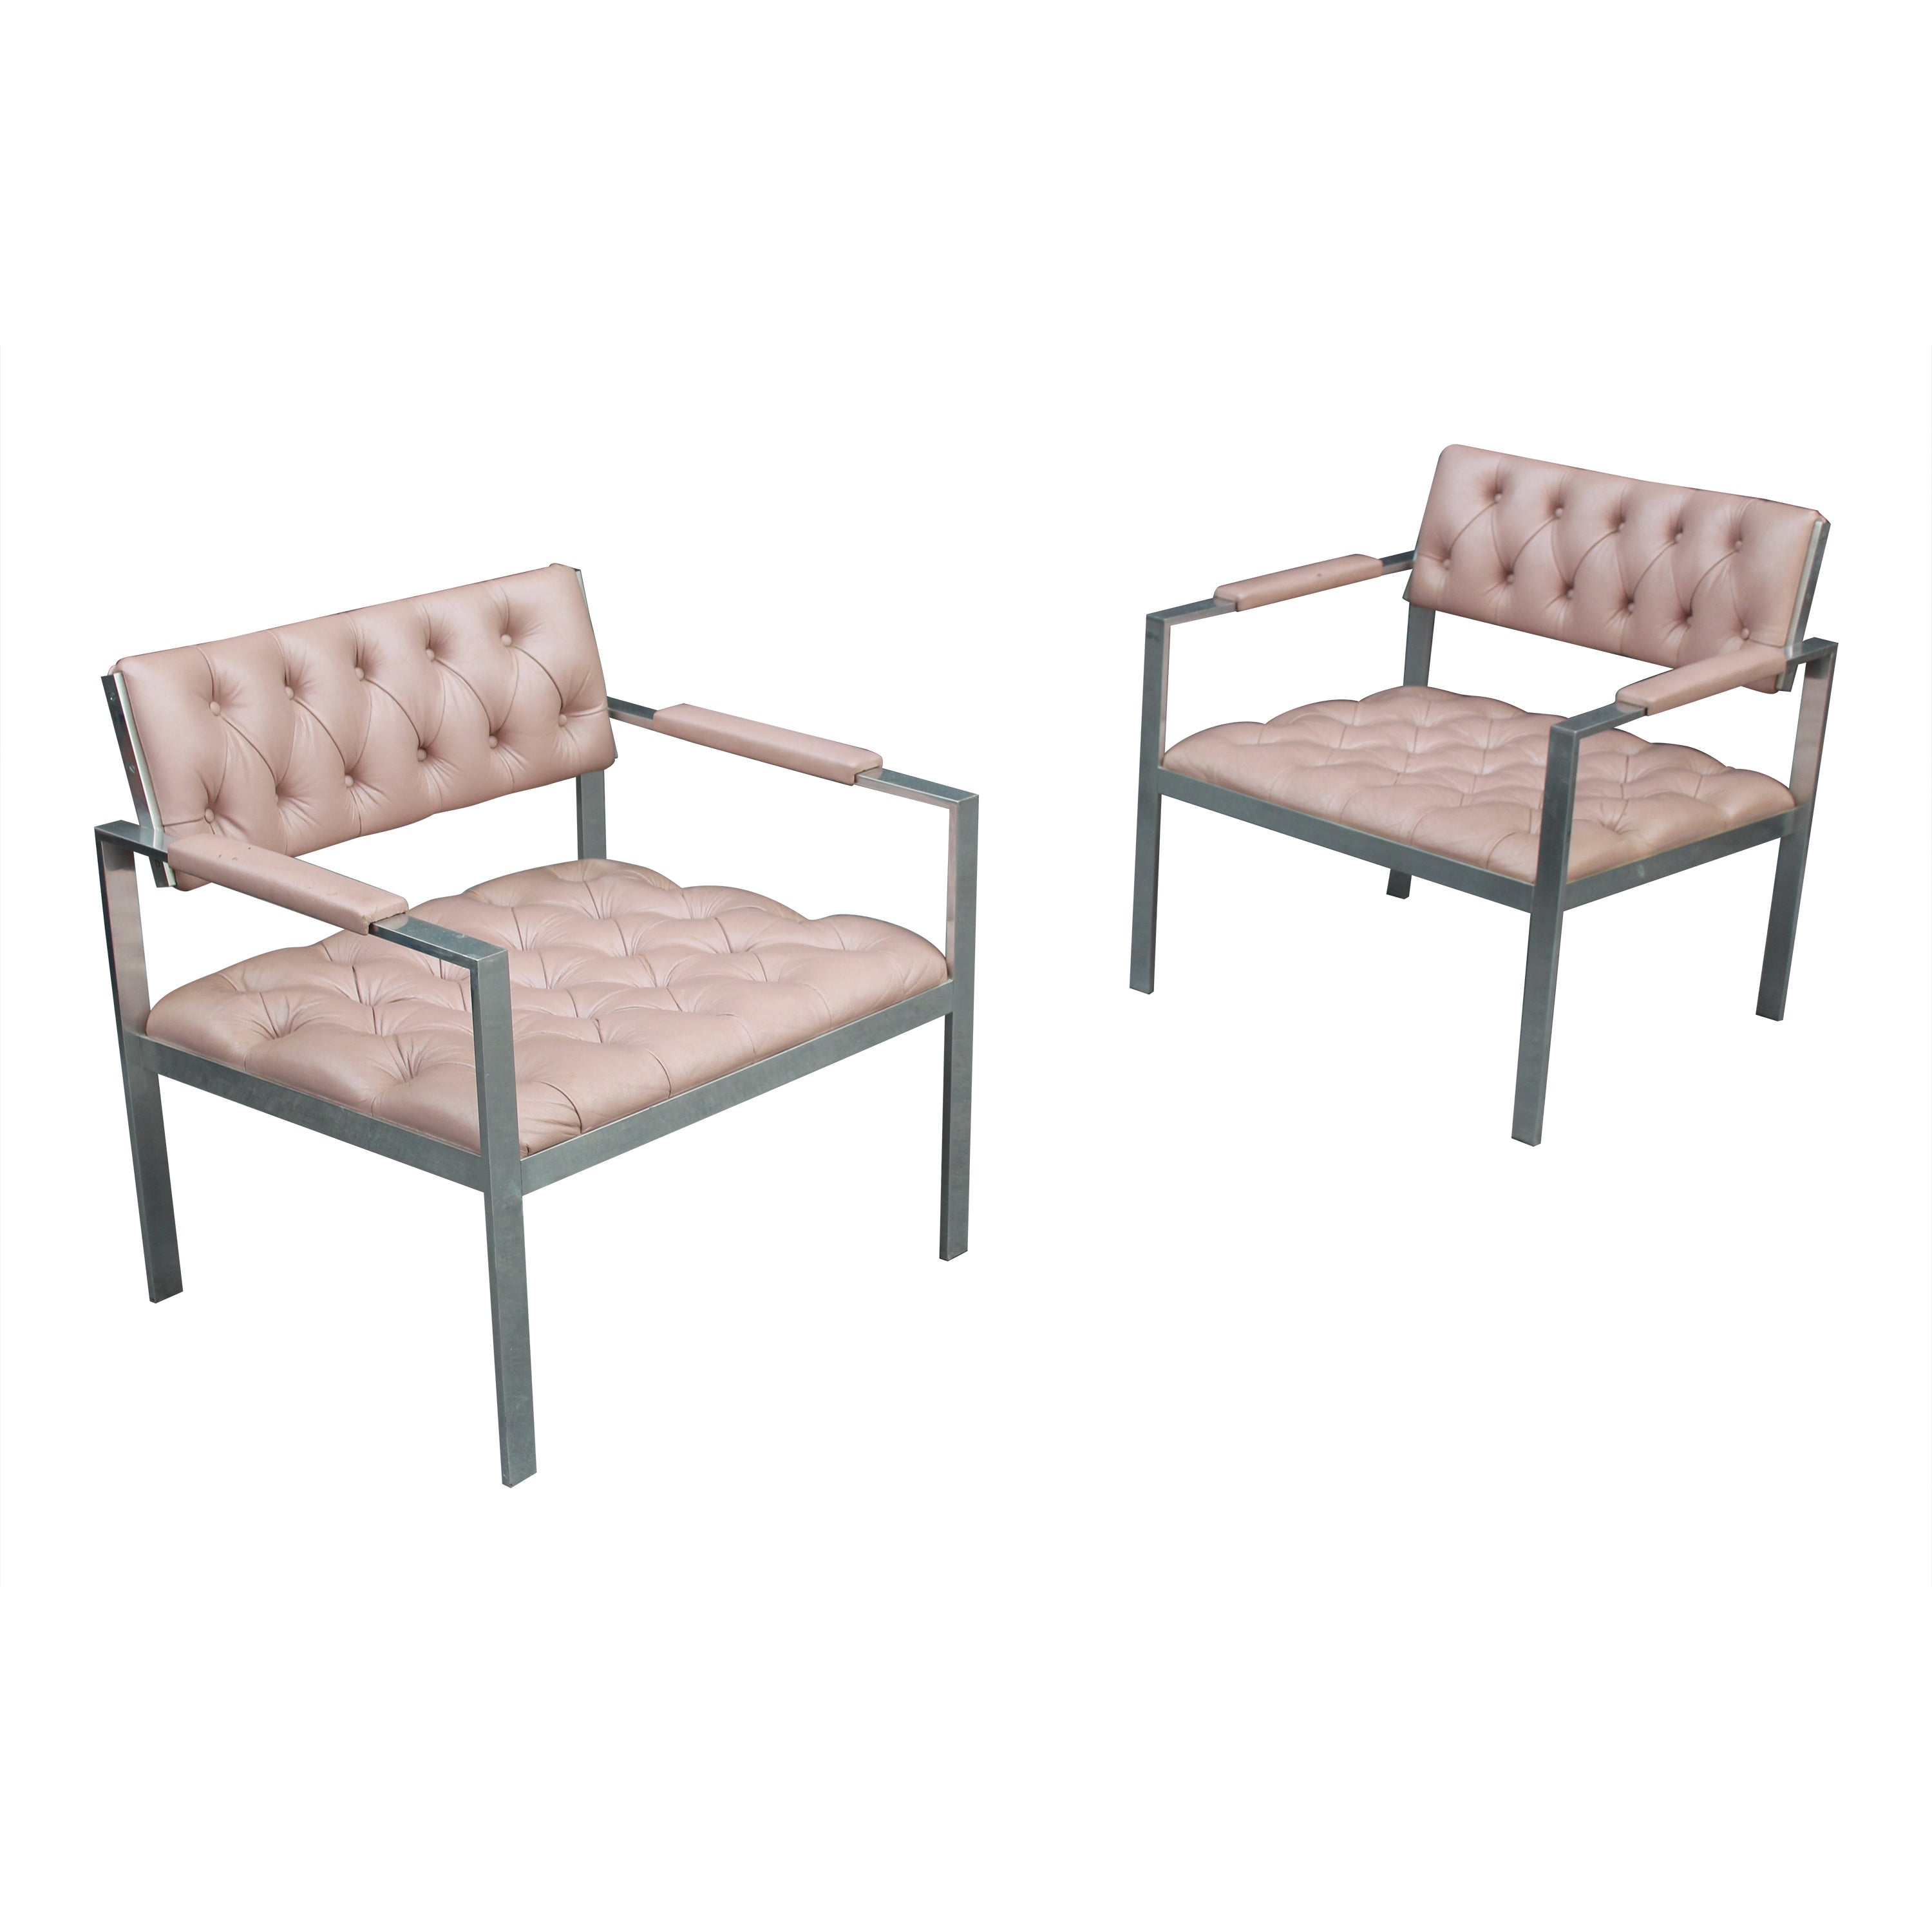 Pair of Rare Harvey Probber Polished Aluminum & Pink Leather Lounge Chairs 1970s For Sale